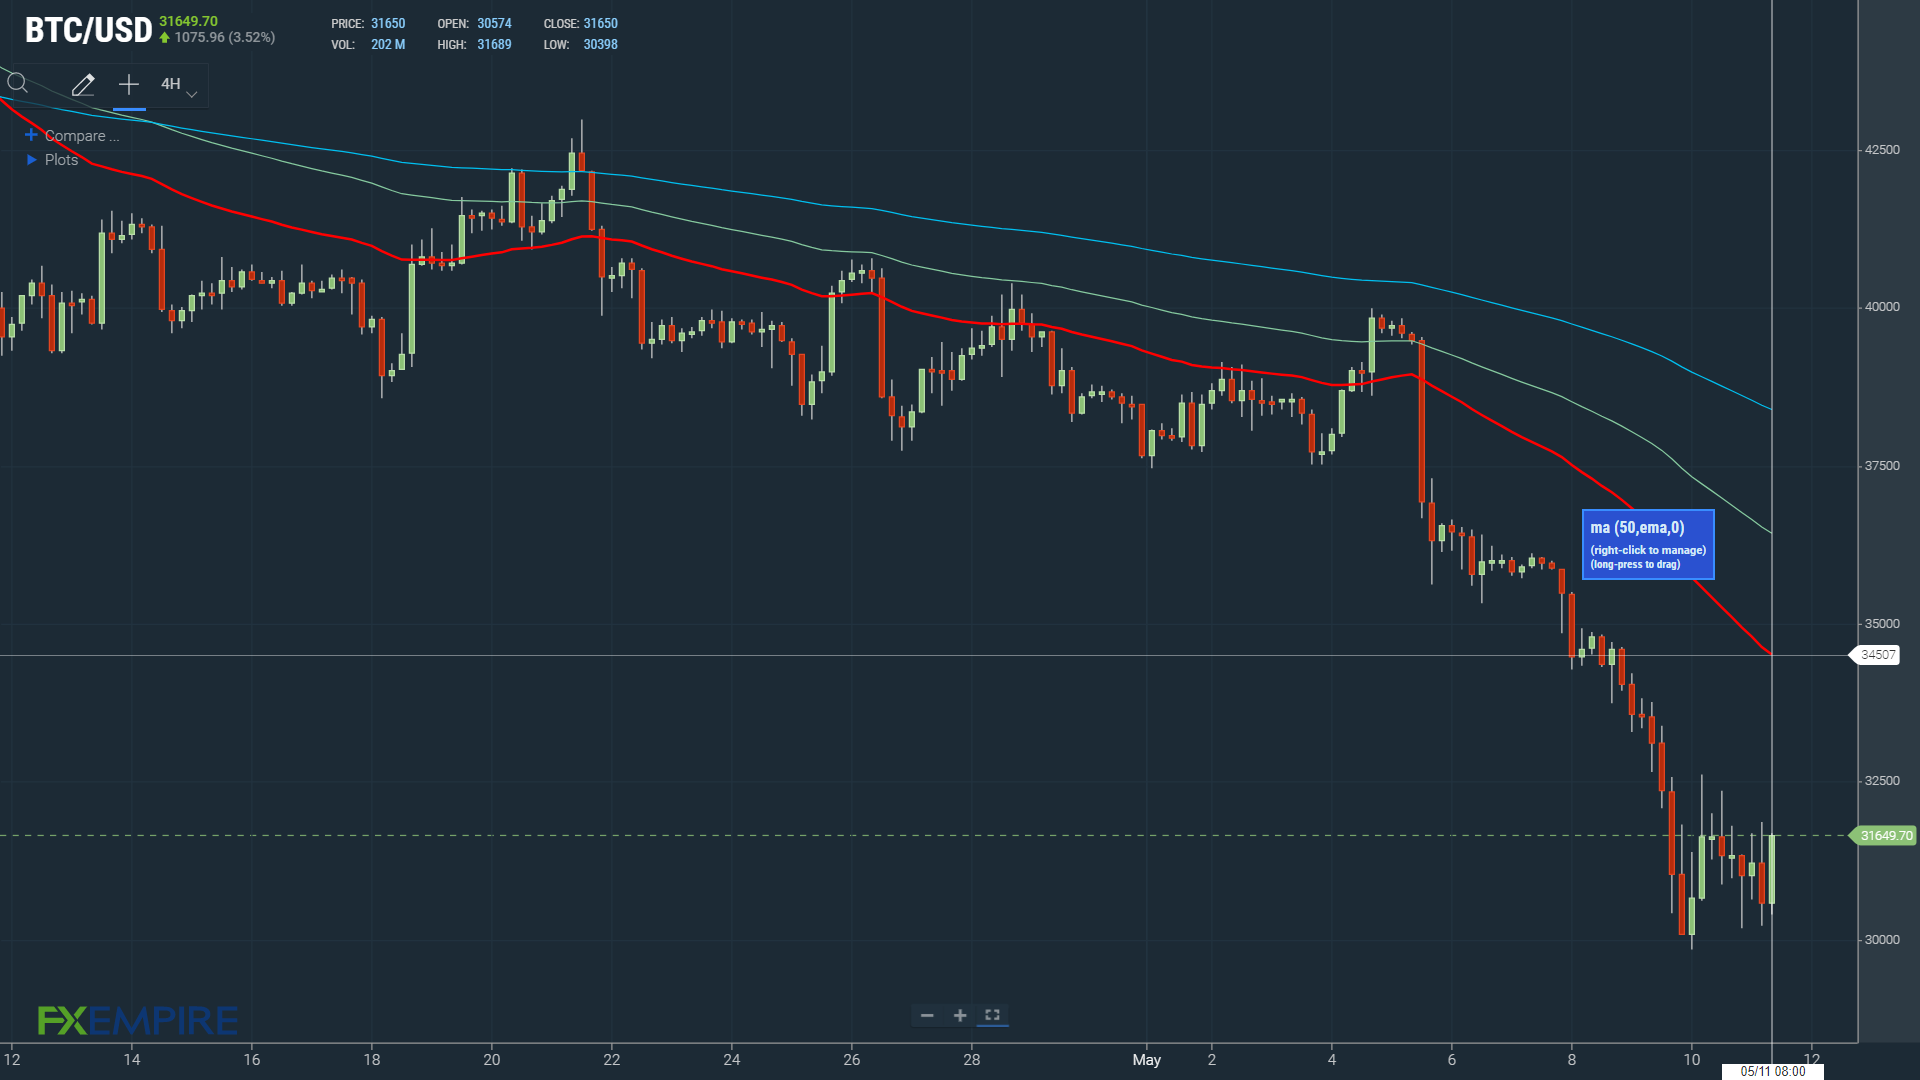 EMAs signal red, with BTC well below the 50-day EMA.